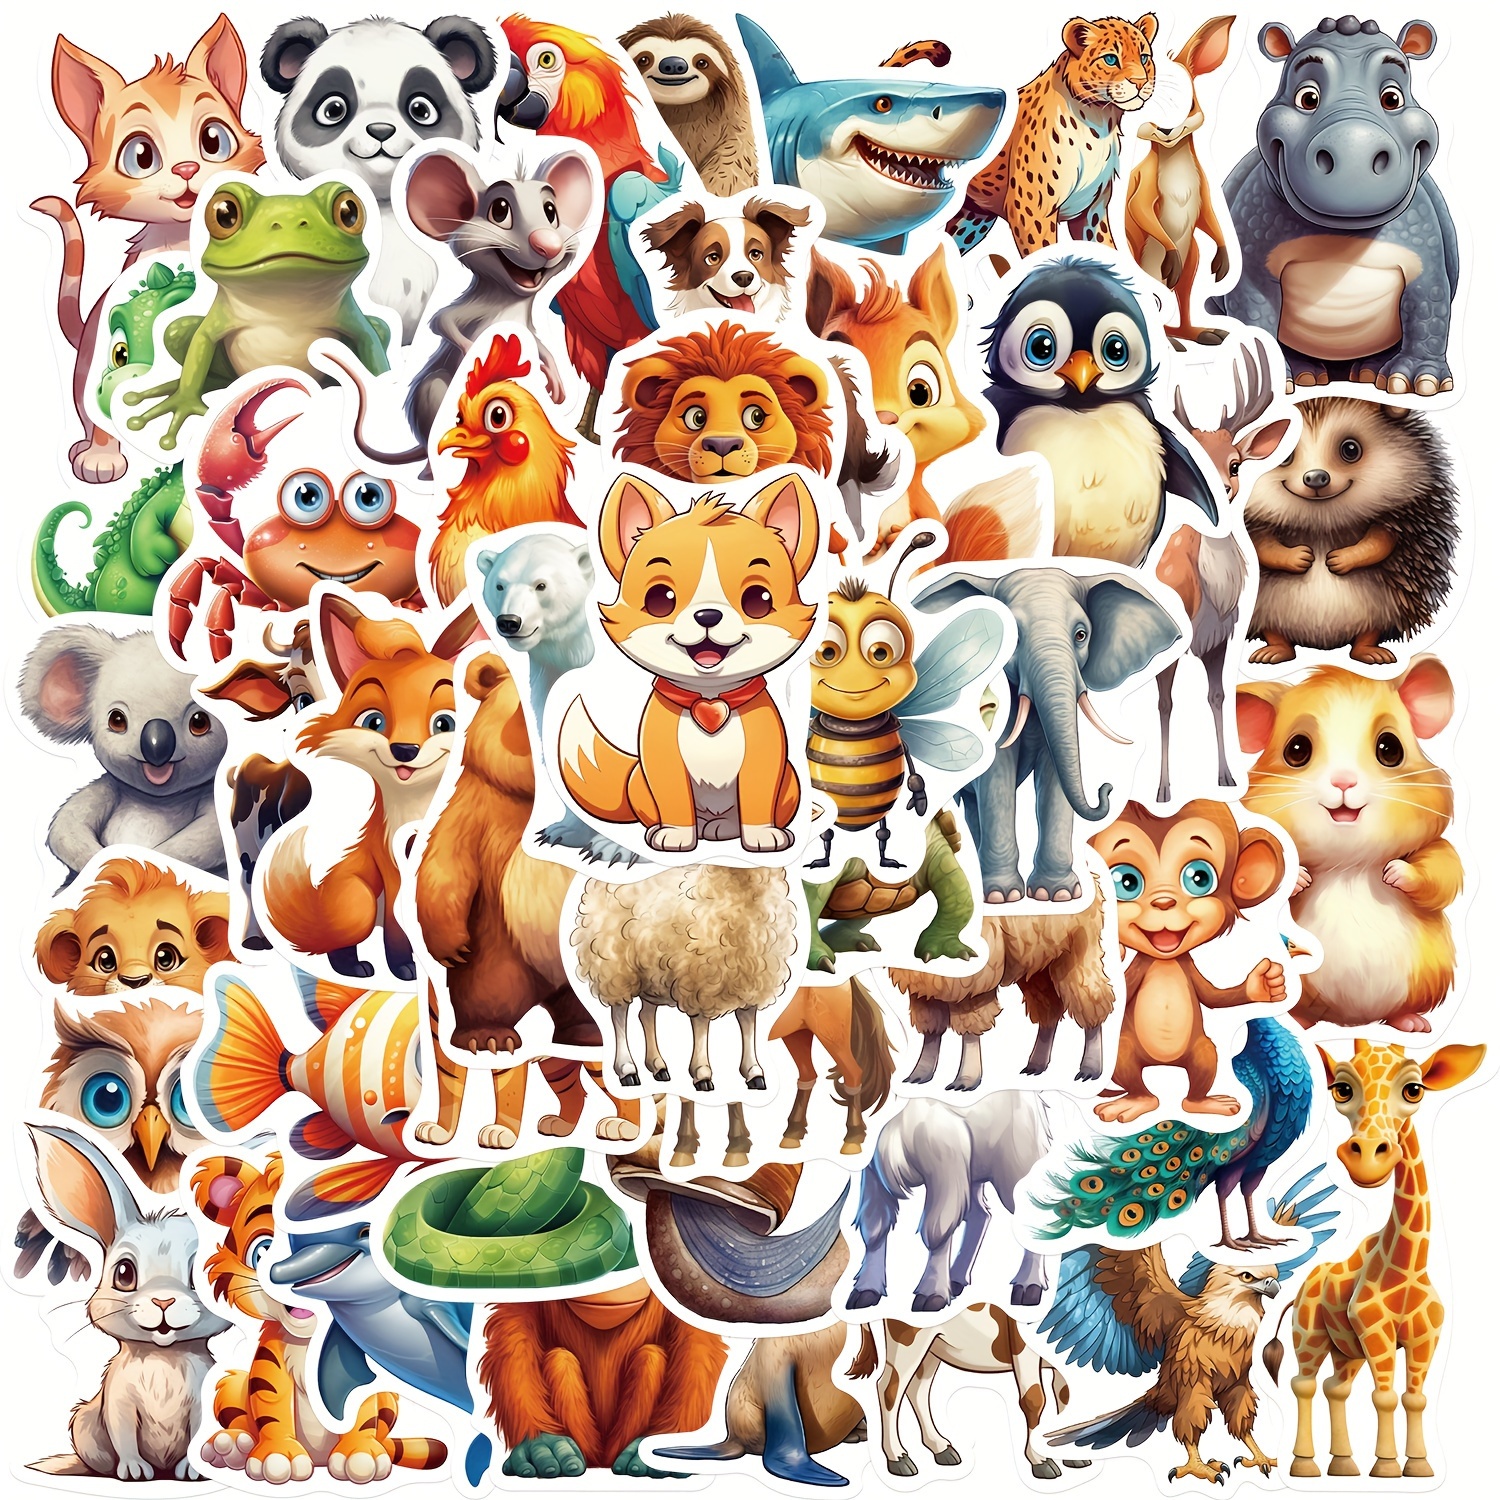 50pcs Colorful Animal Decoration Stickers, Cartoon Graffiti Stickers,  Waterproof Vinyl Stickers, For Water Bottle Car Cup Computer Guitar Bike  Motorcy